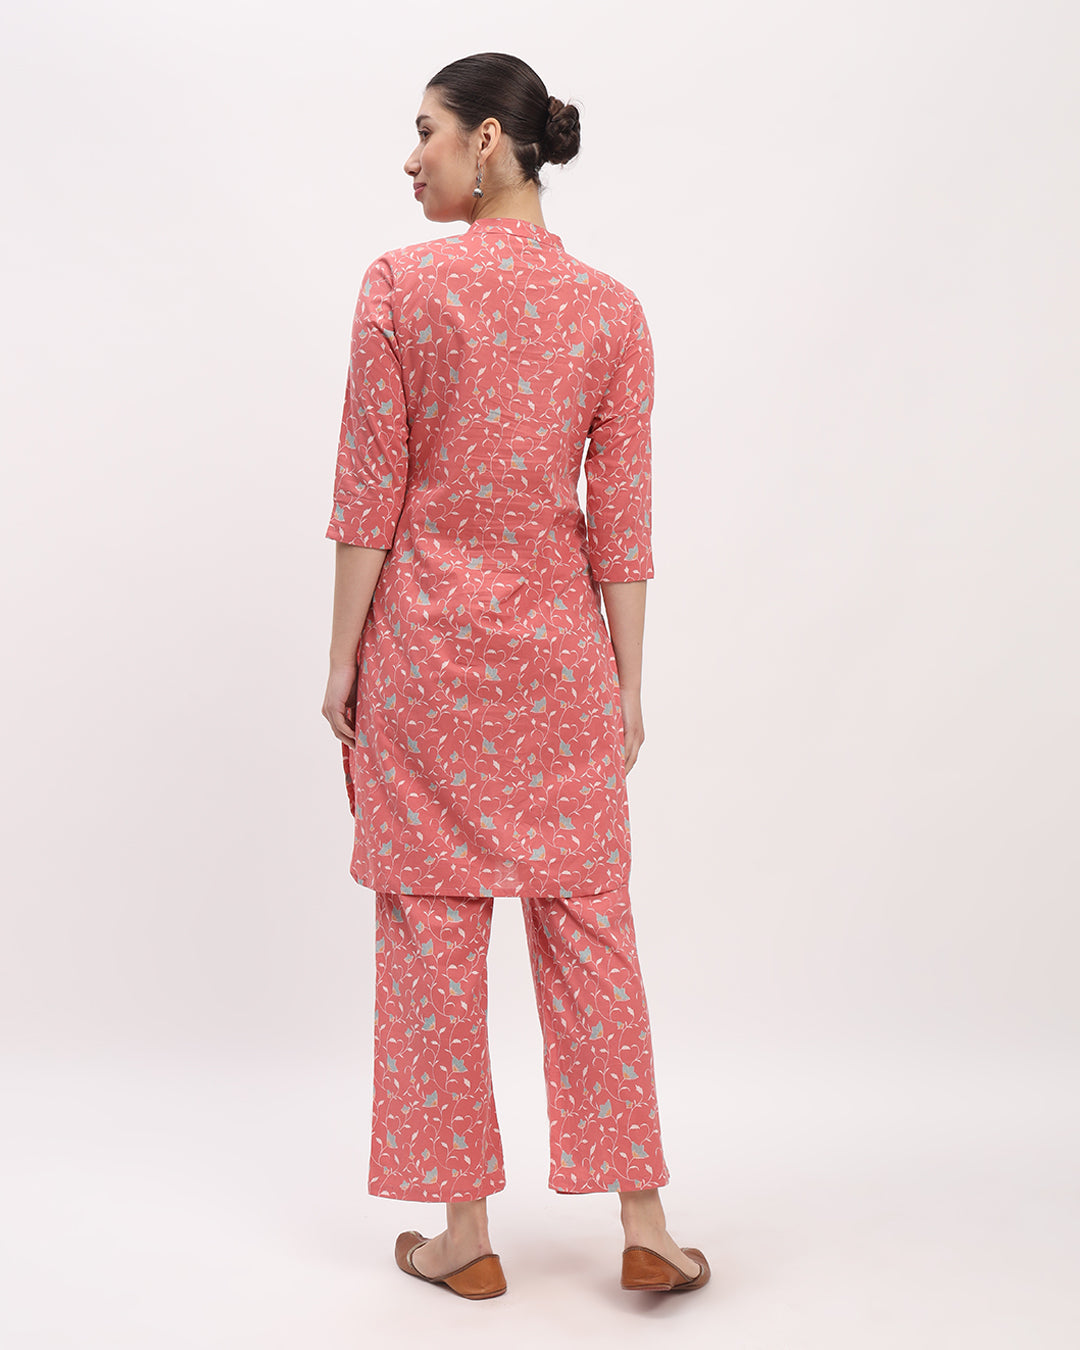 Combo: English Floral Garden & Maple Leaf Band Collar Neck Printed Kurta (Without Bottoms)